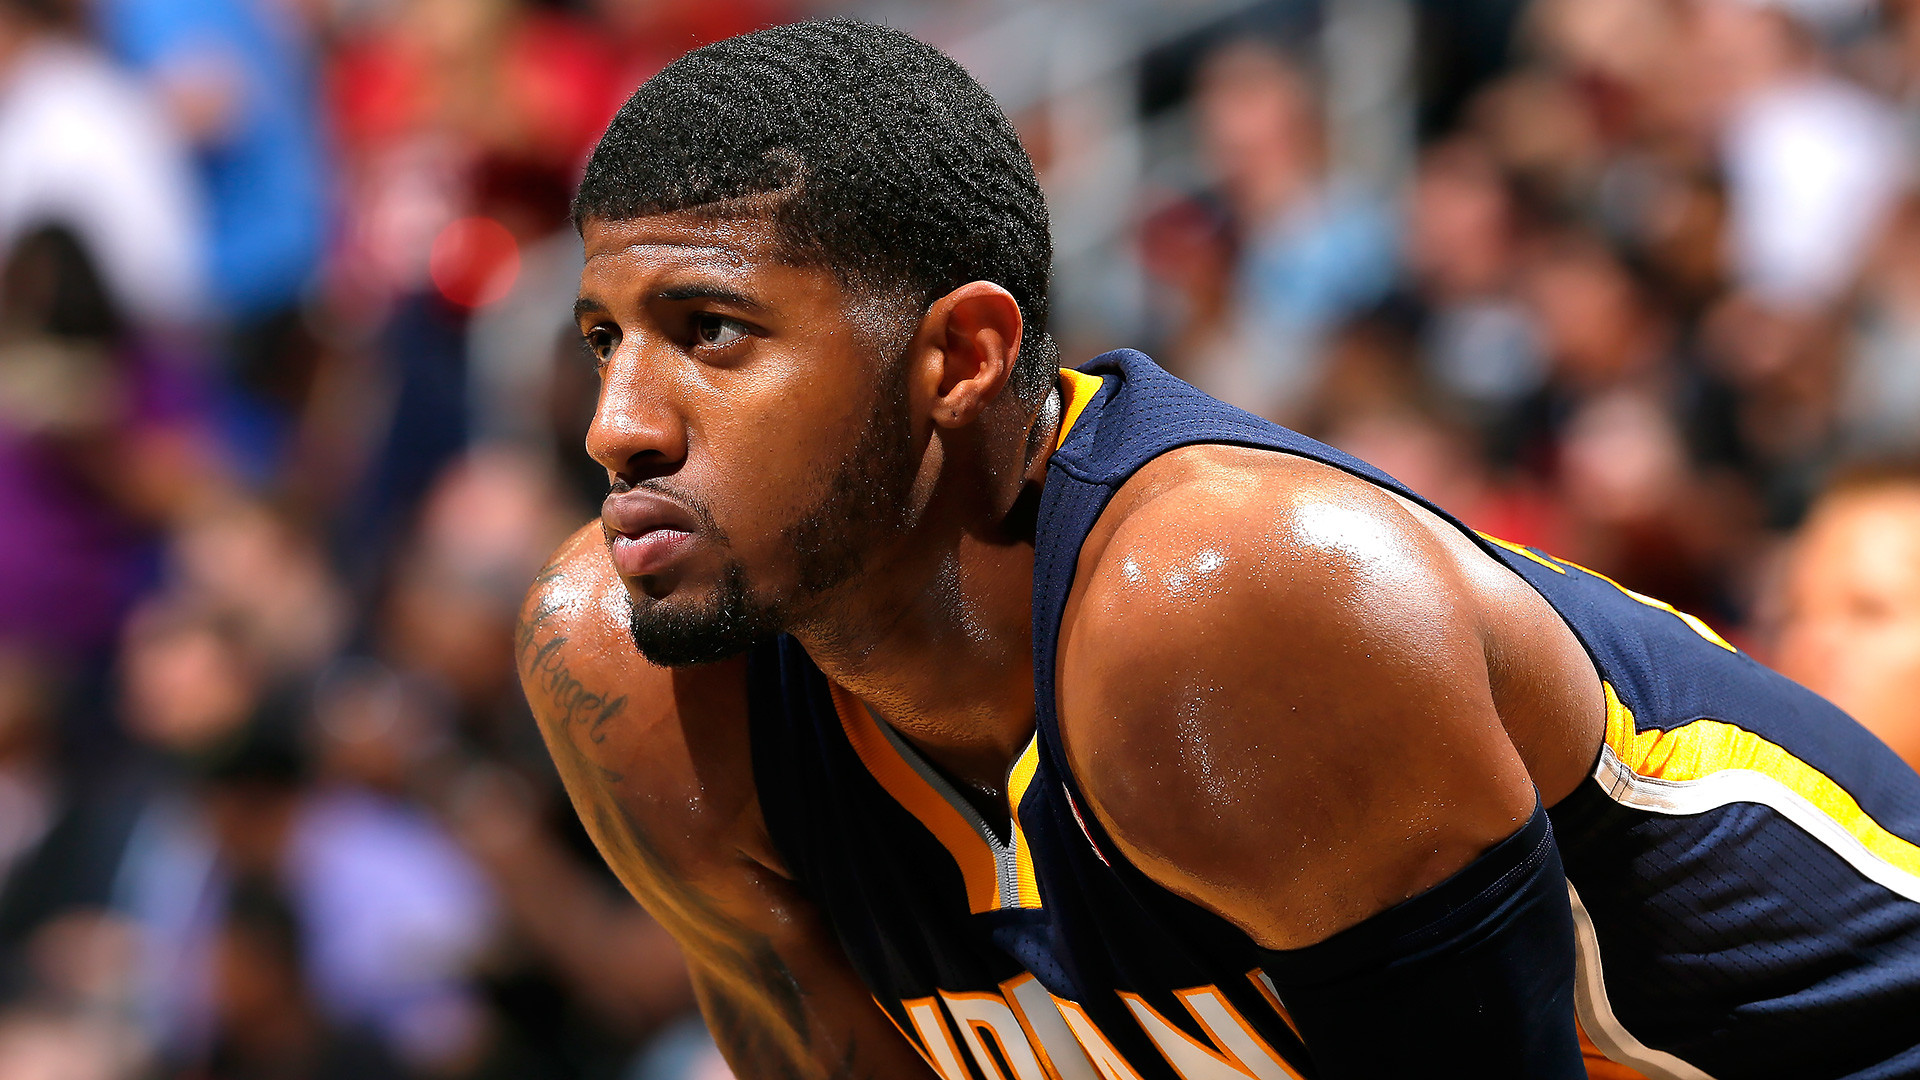 1920x1080 Pacers star Paul George can dunk again